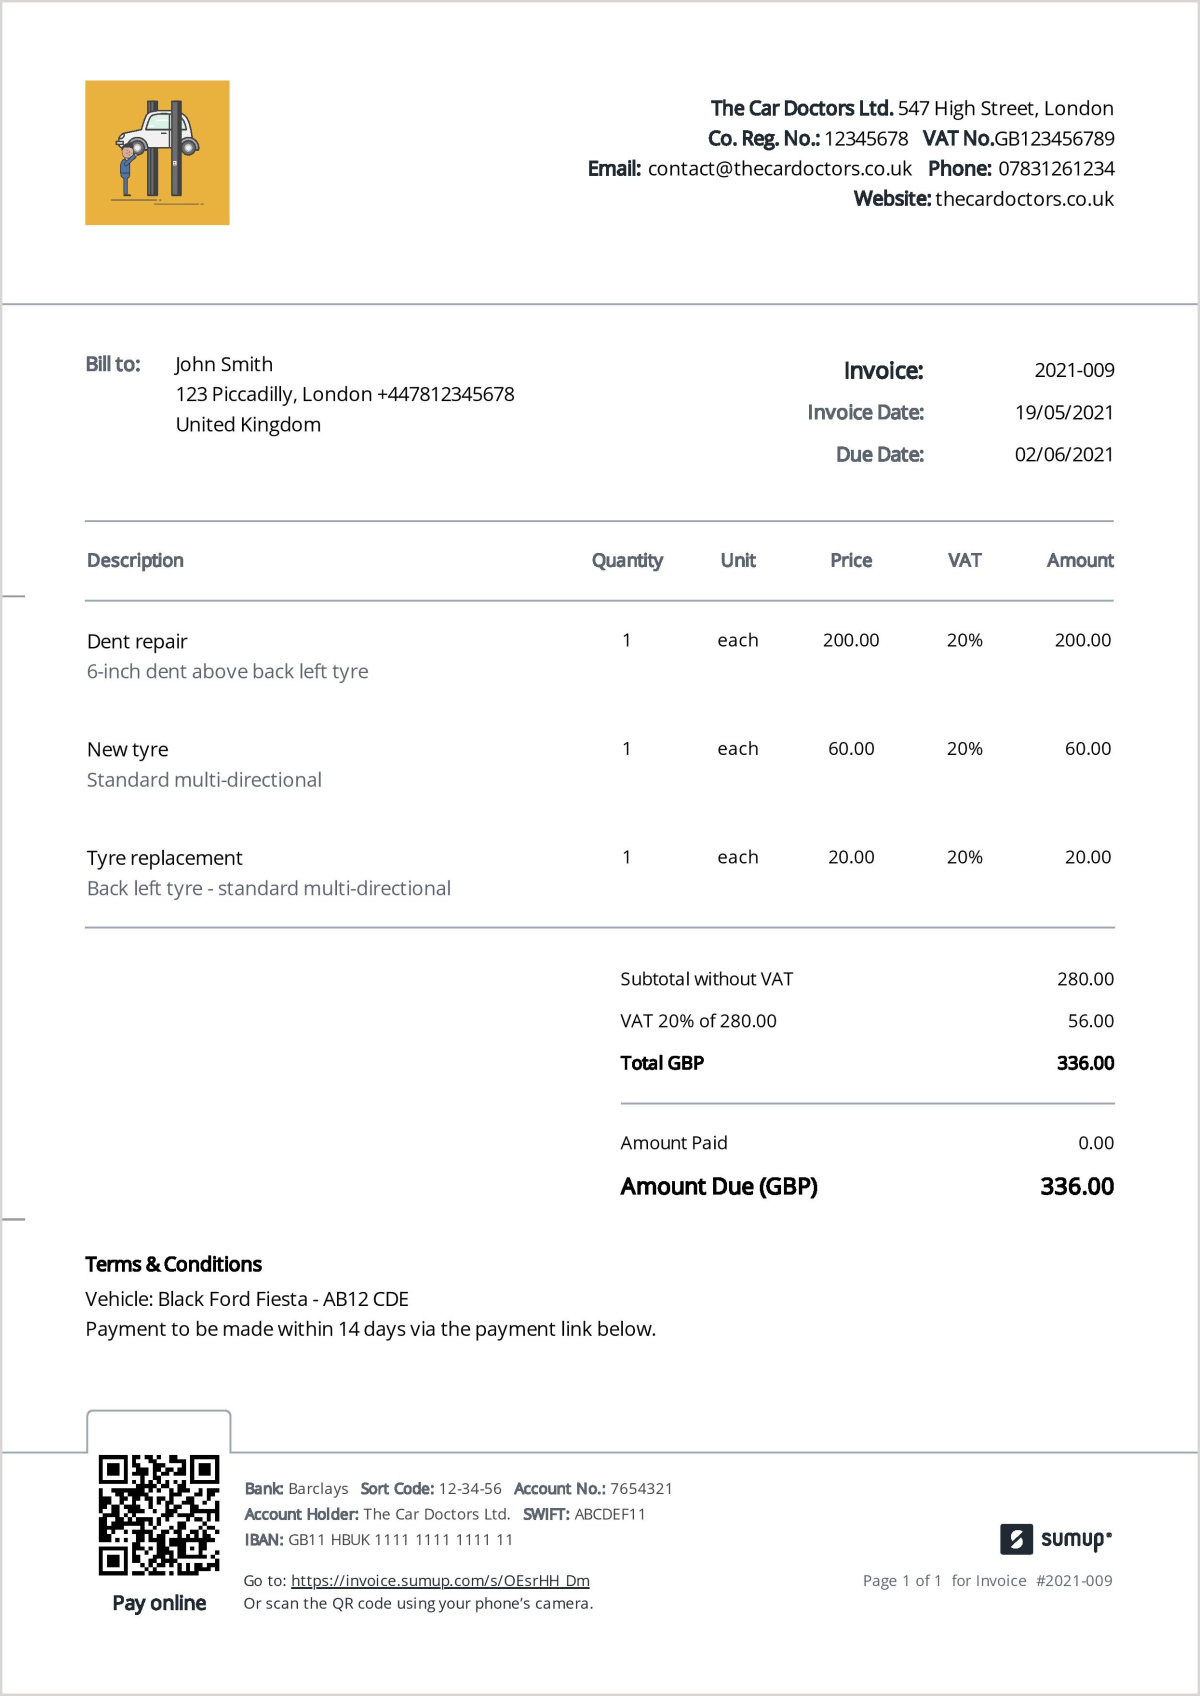 Sample garage invoice created with SumUp Invoices